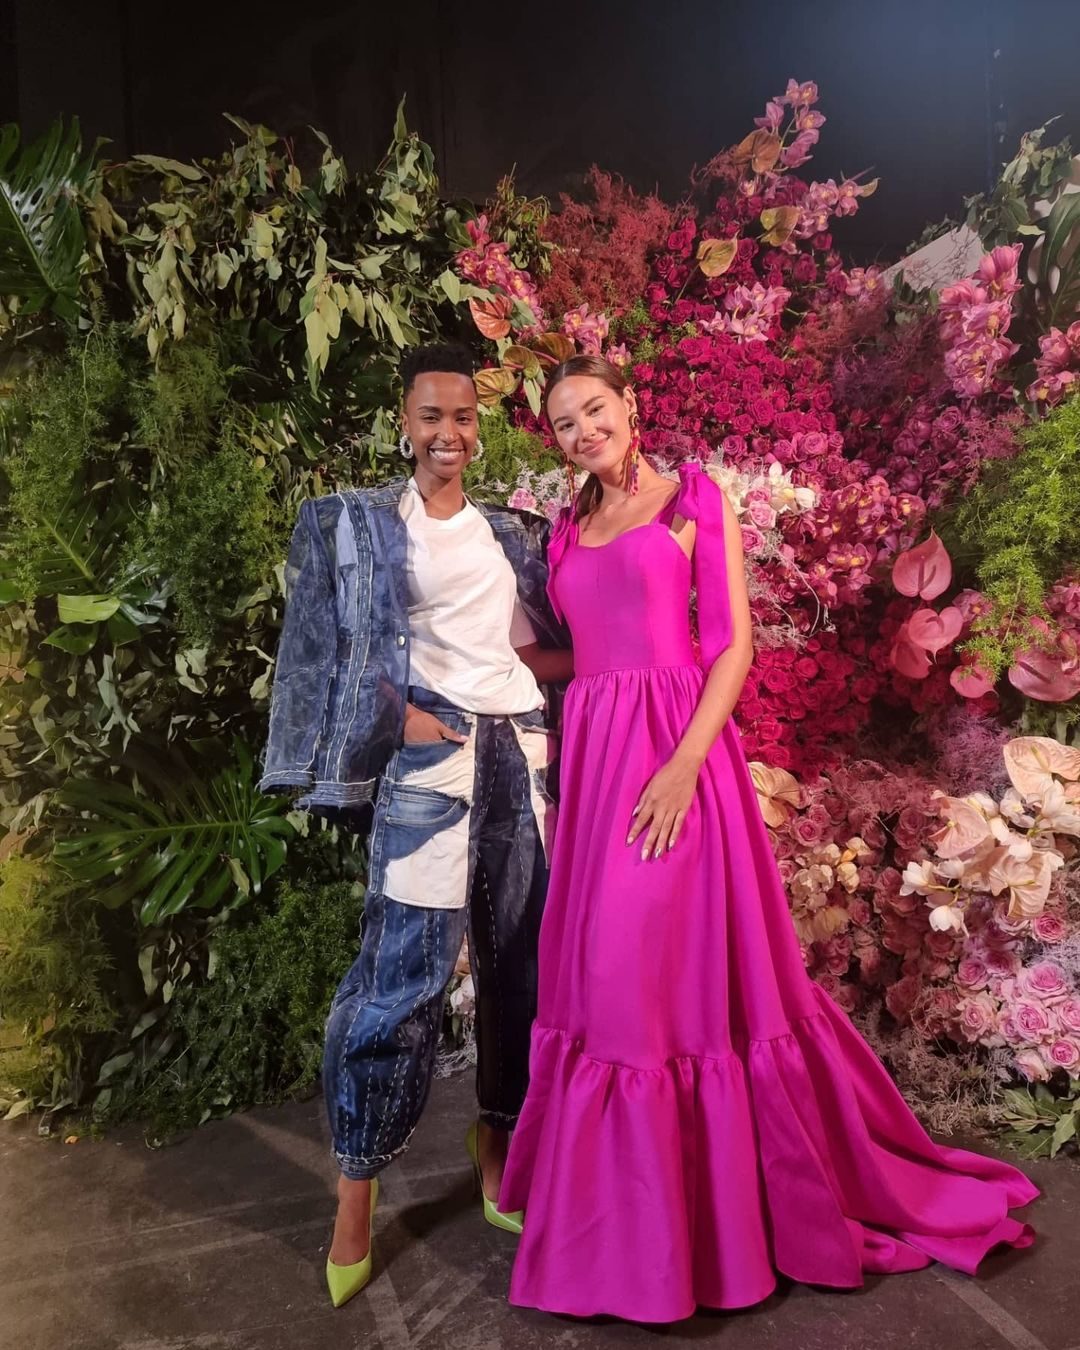 LOOK: Catriona Gray and Zozibini Tunzi reunite for Miss South Africa